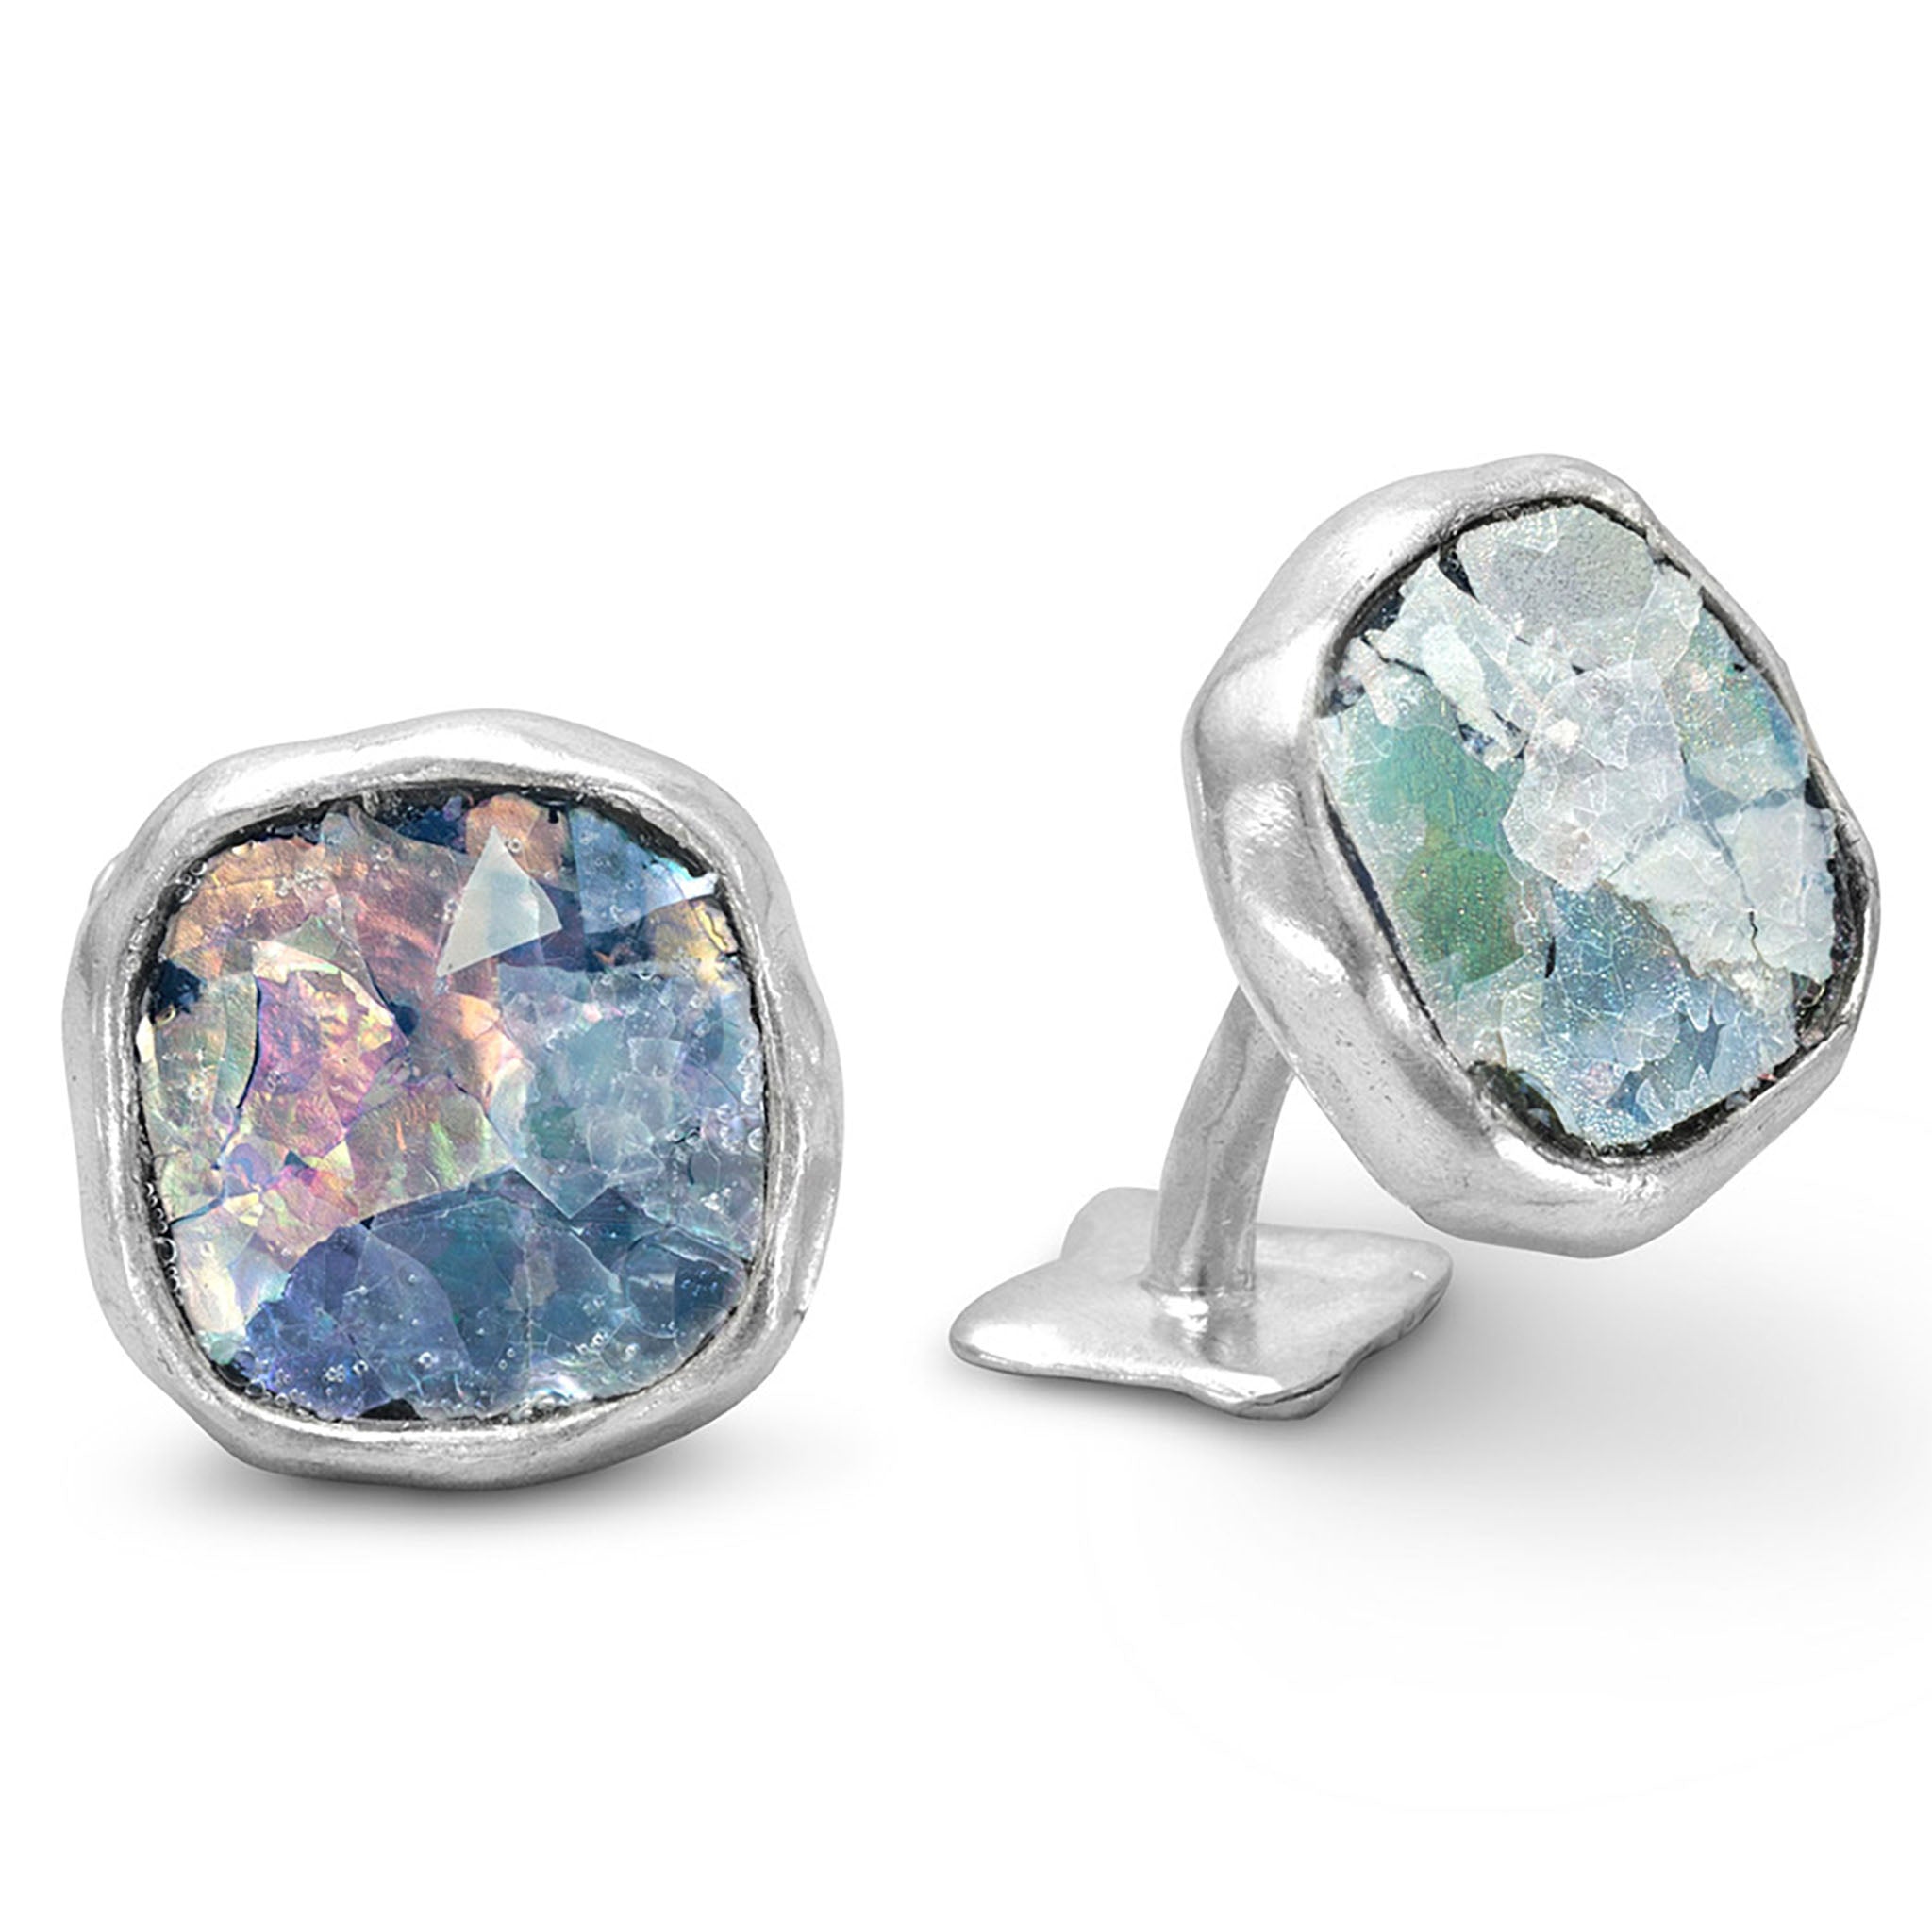 Hammered Silver Roman Glass Cuff Links